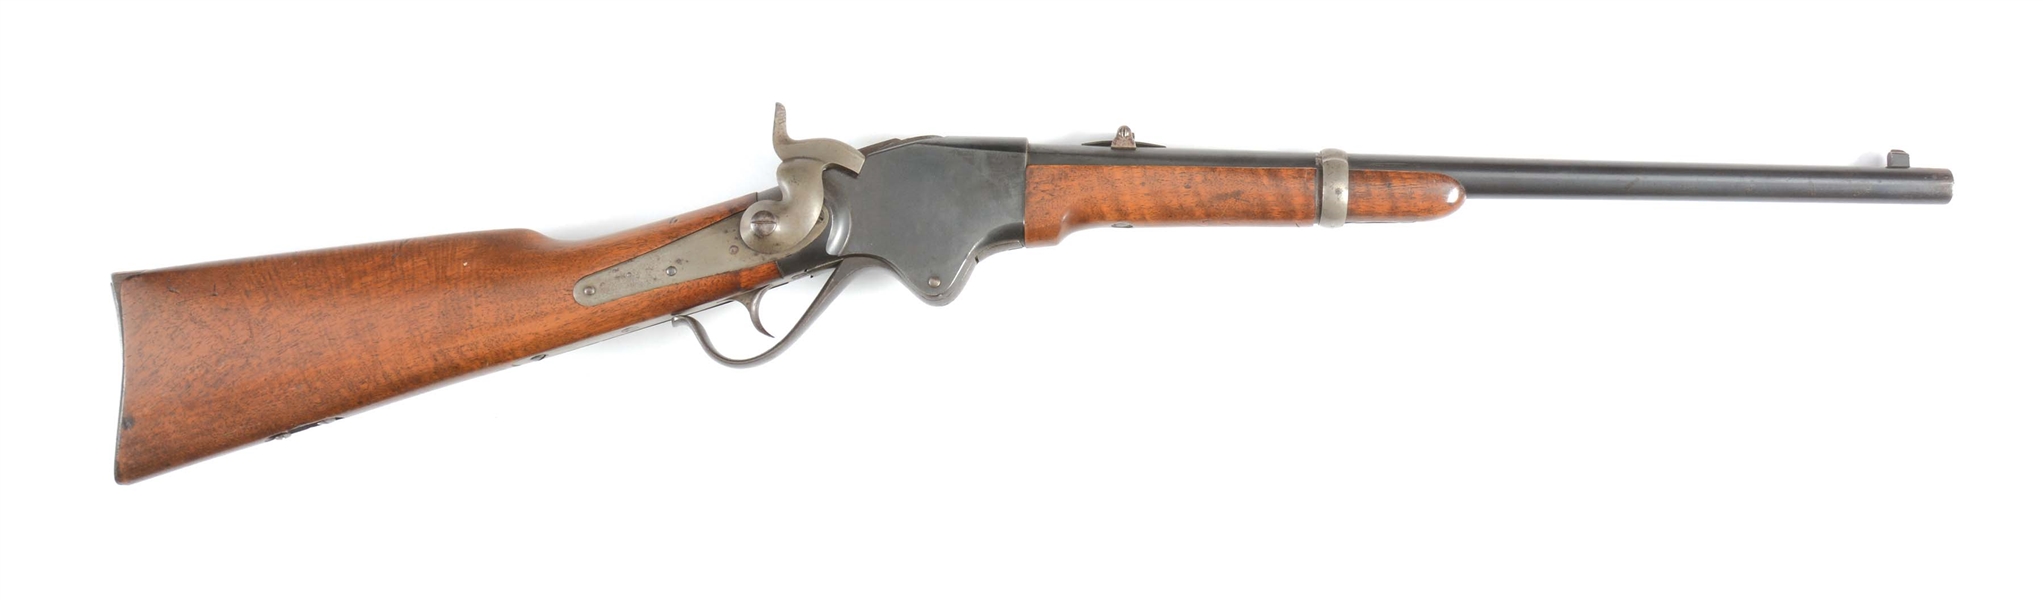 (A) BELGIAN COPY OF A SPENCER LEVER ACTION RIFLE.